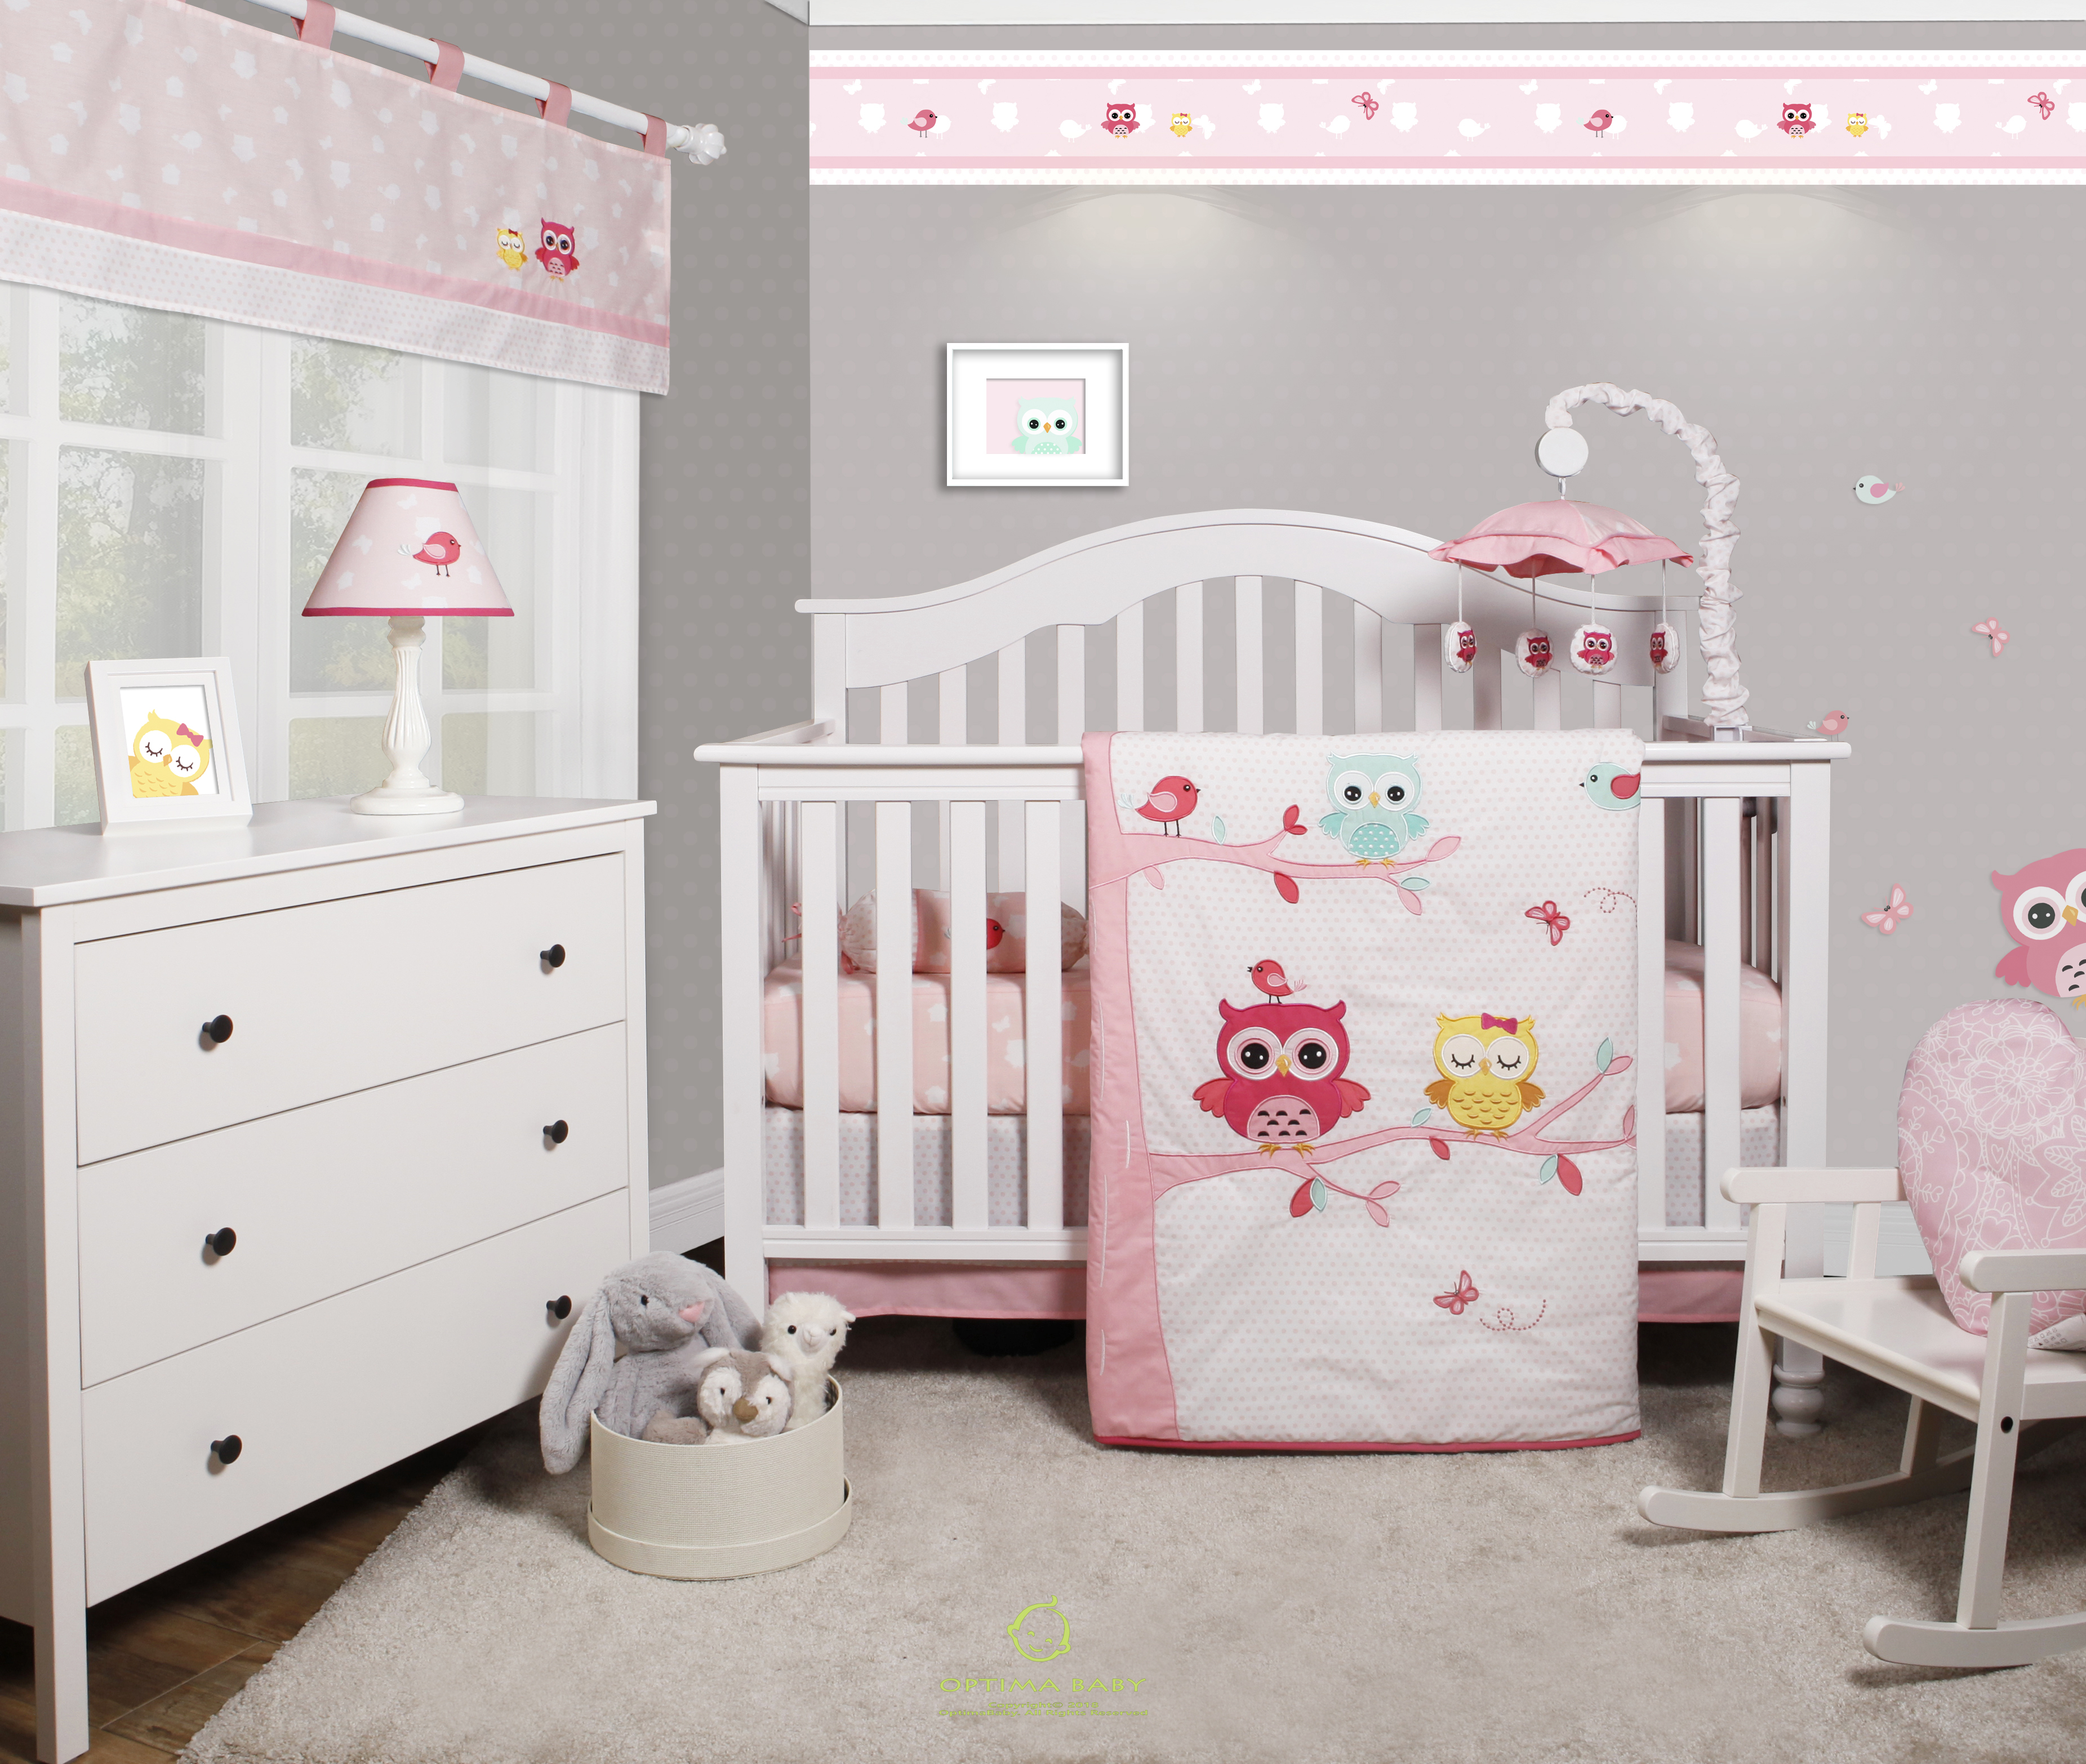 Bumperless 5 pieces Optimababy Owls Baby Bedding Set - image 1 of 4